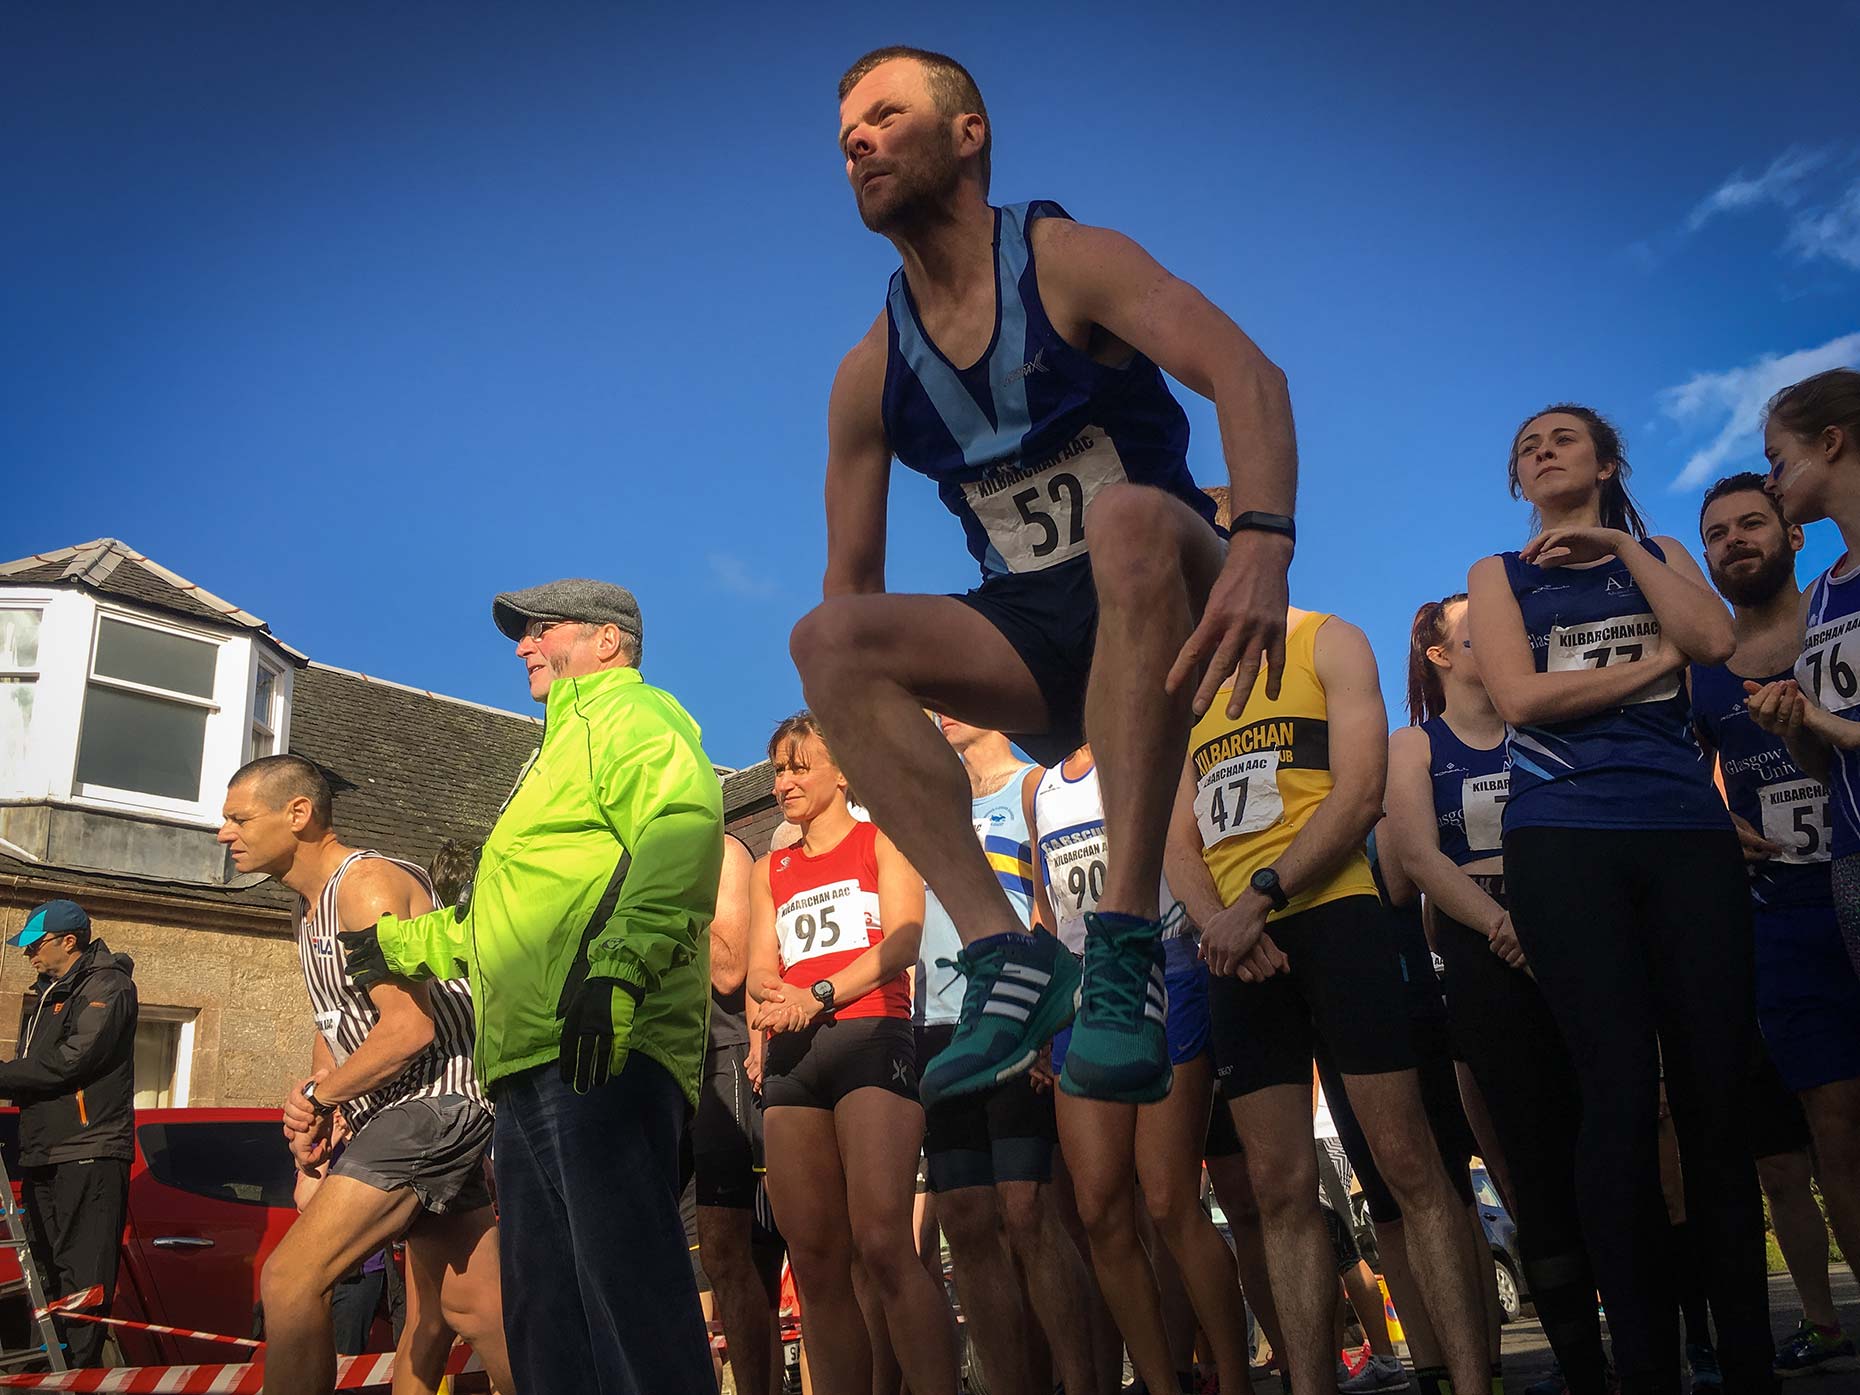 Running club athletes competing, by Scotland photographer